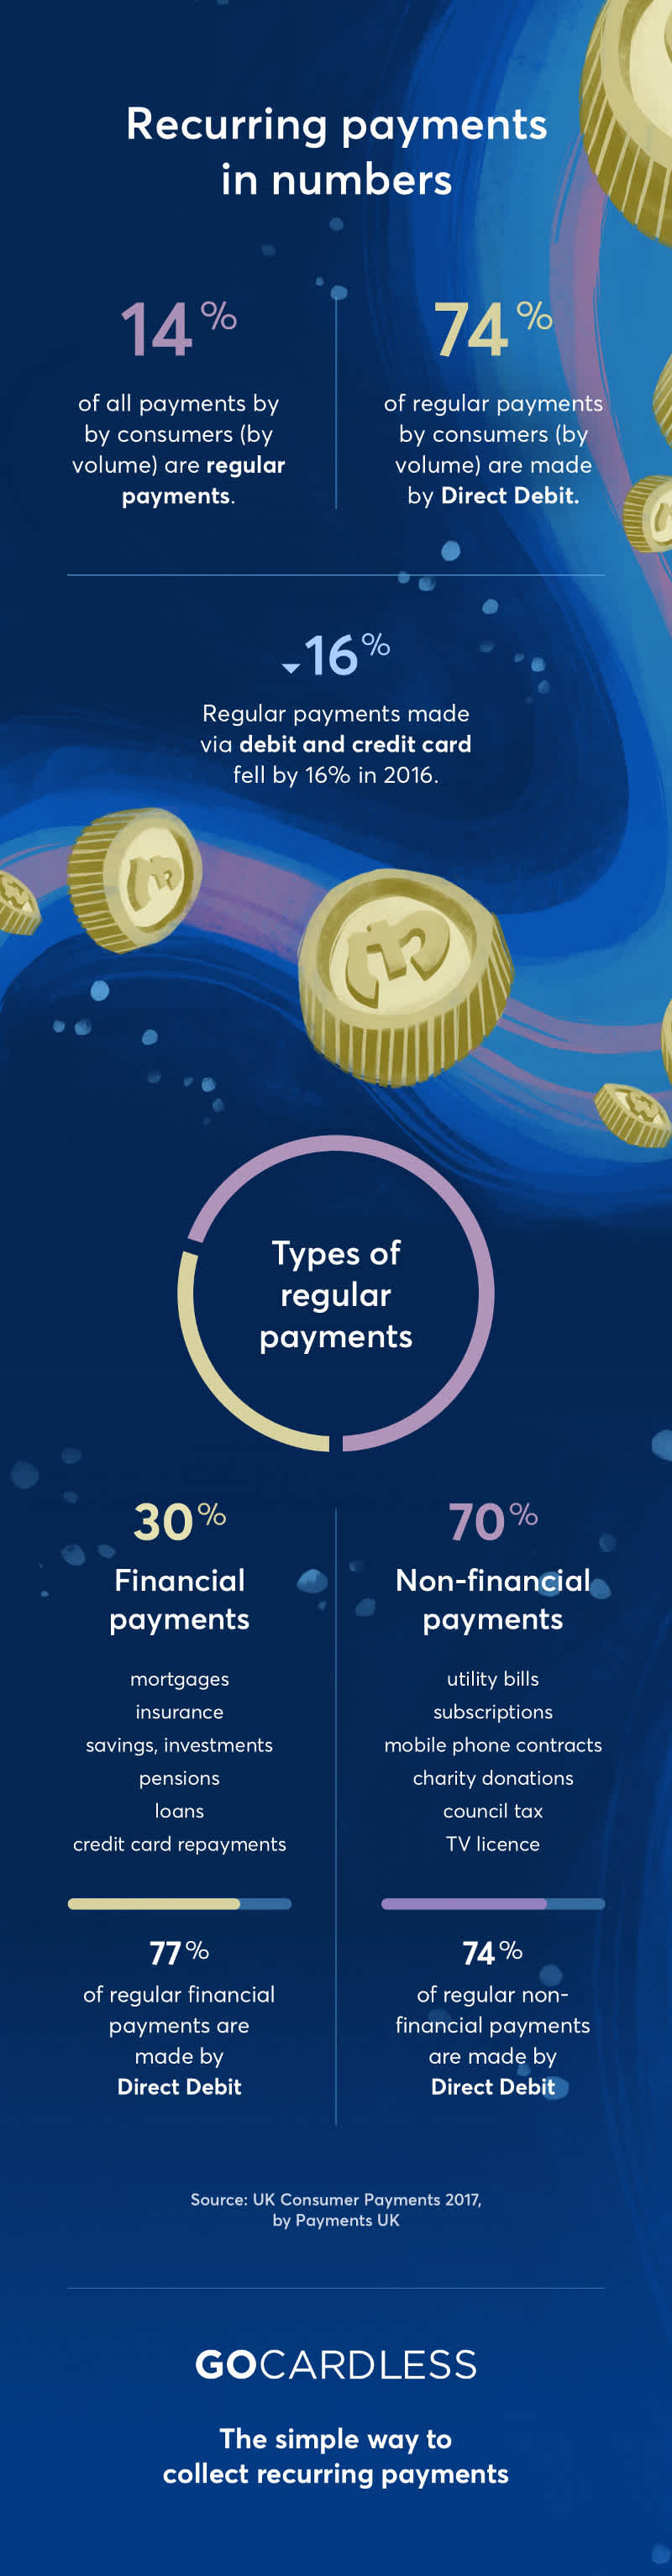 blog > images > recurring-payments-in-numbers > recurring-payments-in-numbers.jpg